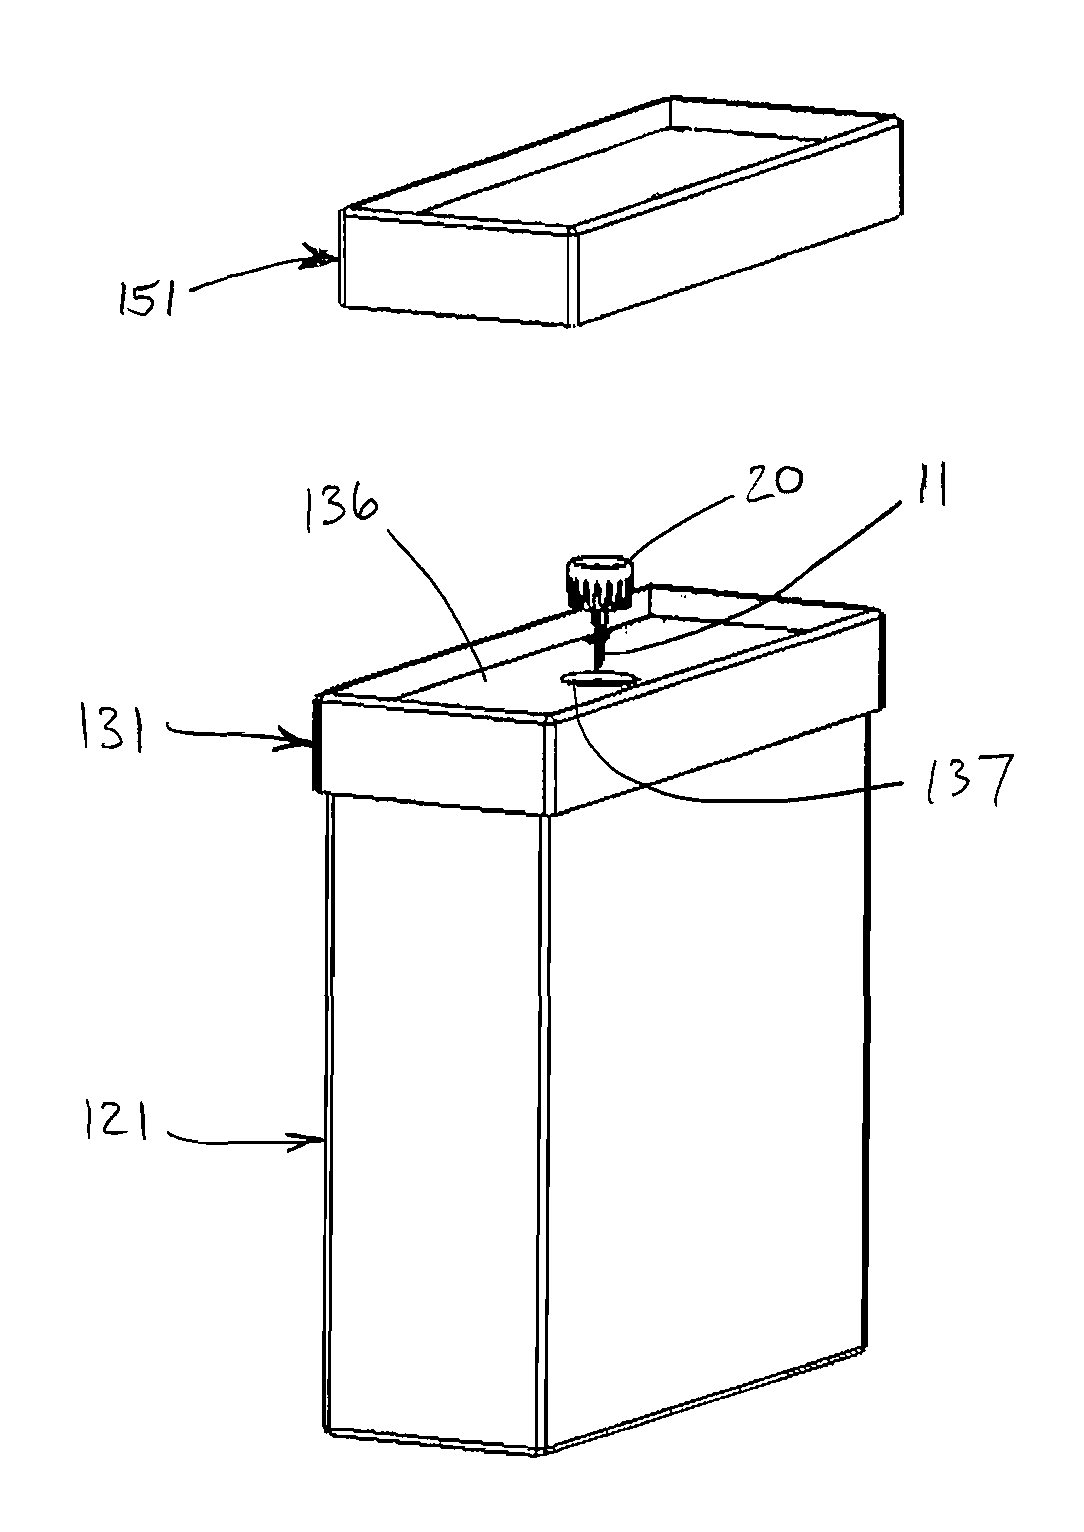 Shipping Container Integrating A Sharps Disposal Container With A New Product Storage Container